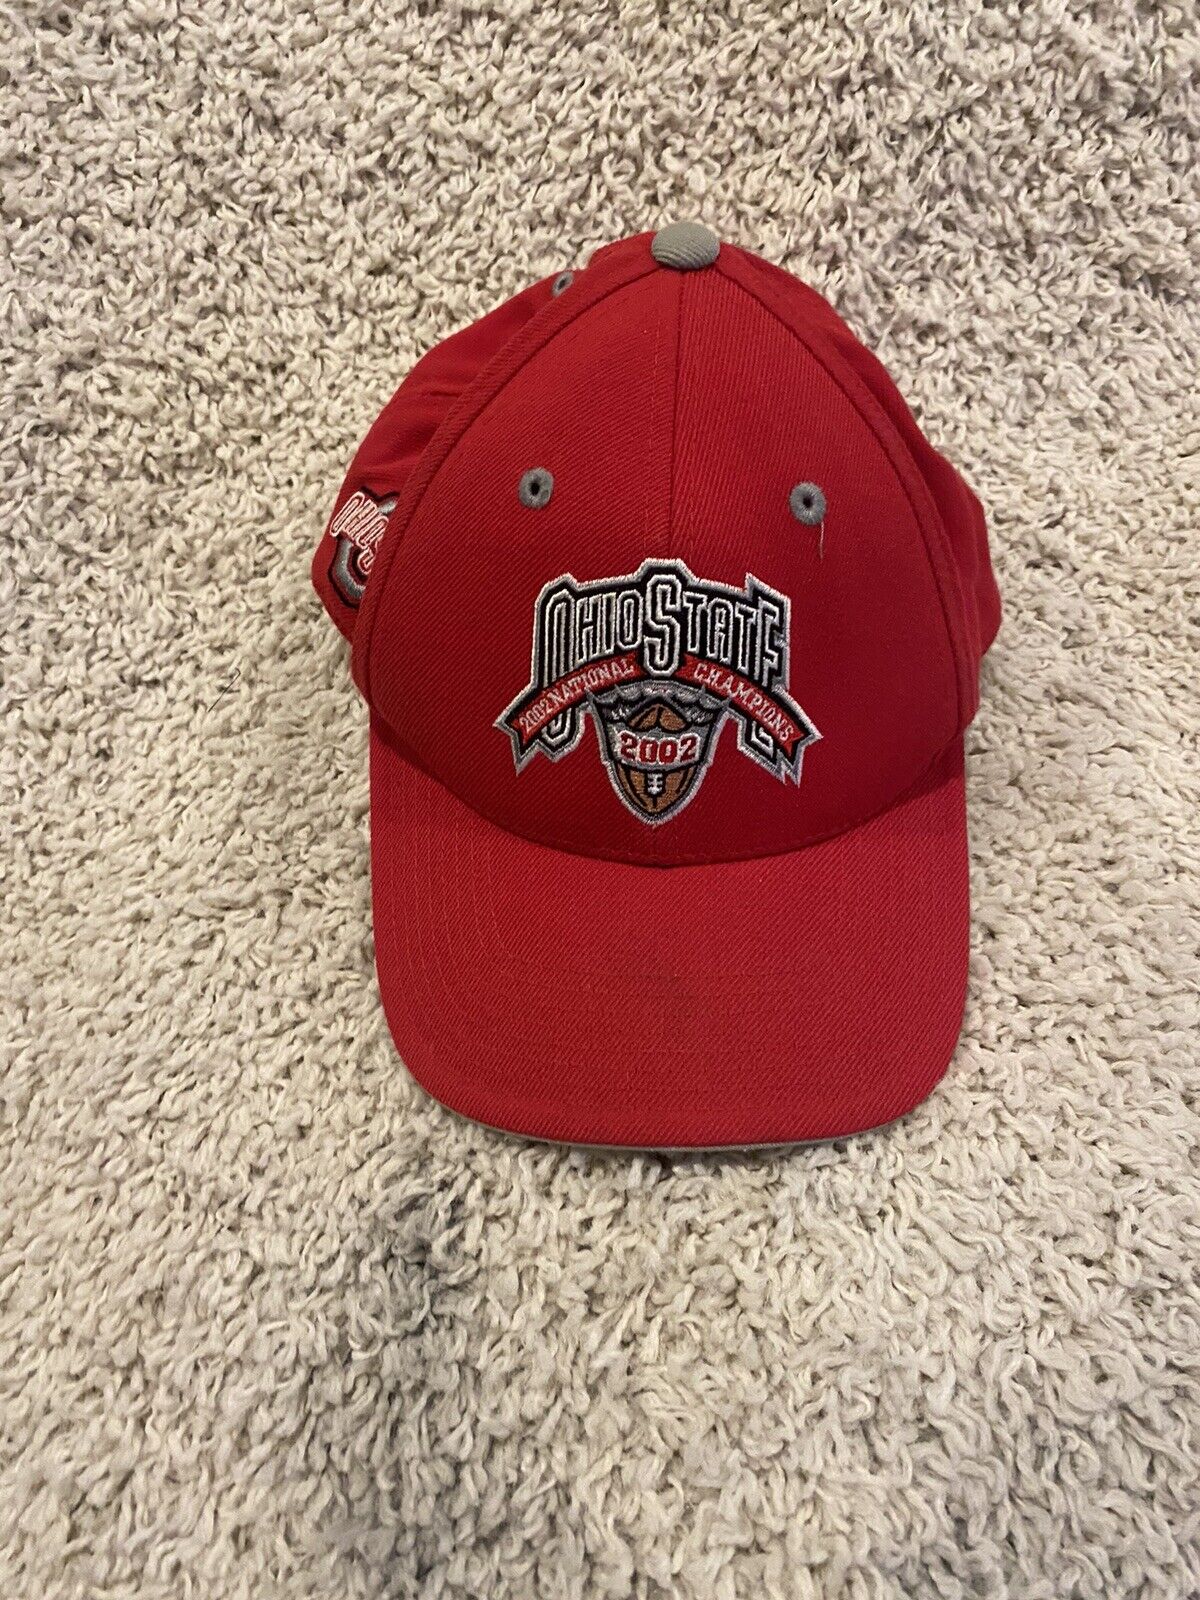 Vintage Ohio State Buckeyes Hat Cap strapback adult one size red 2002 mens a2348